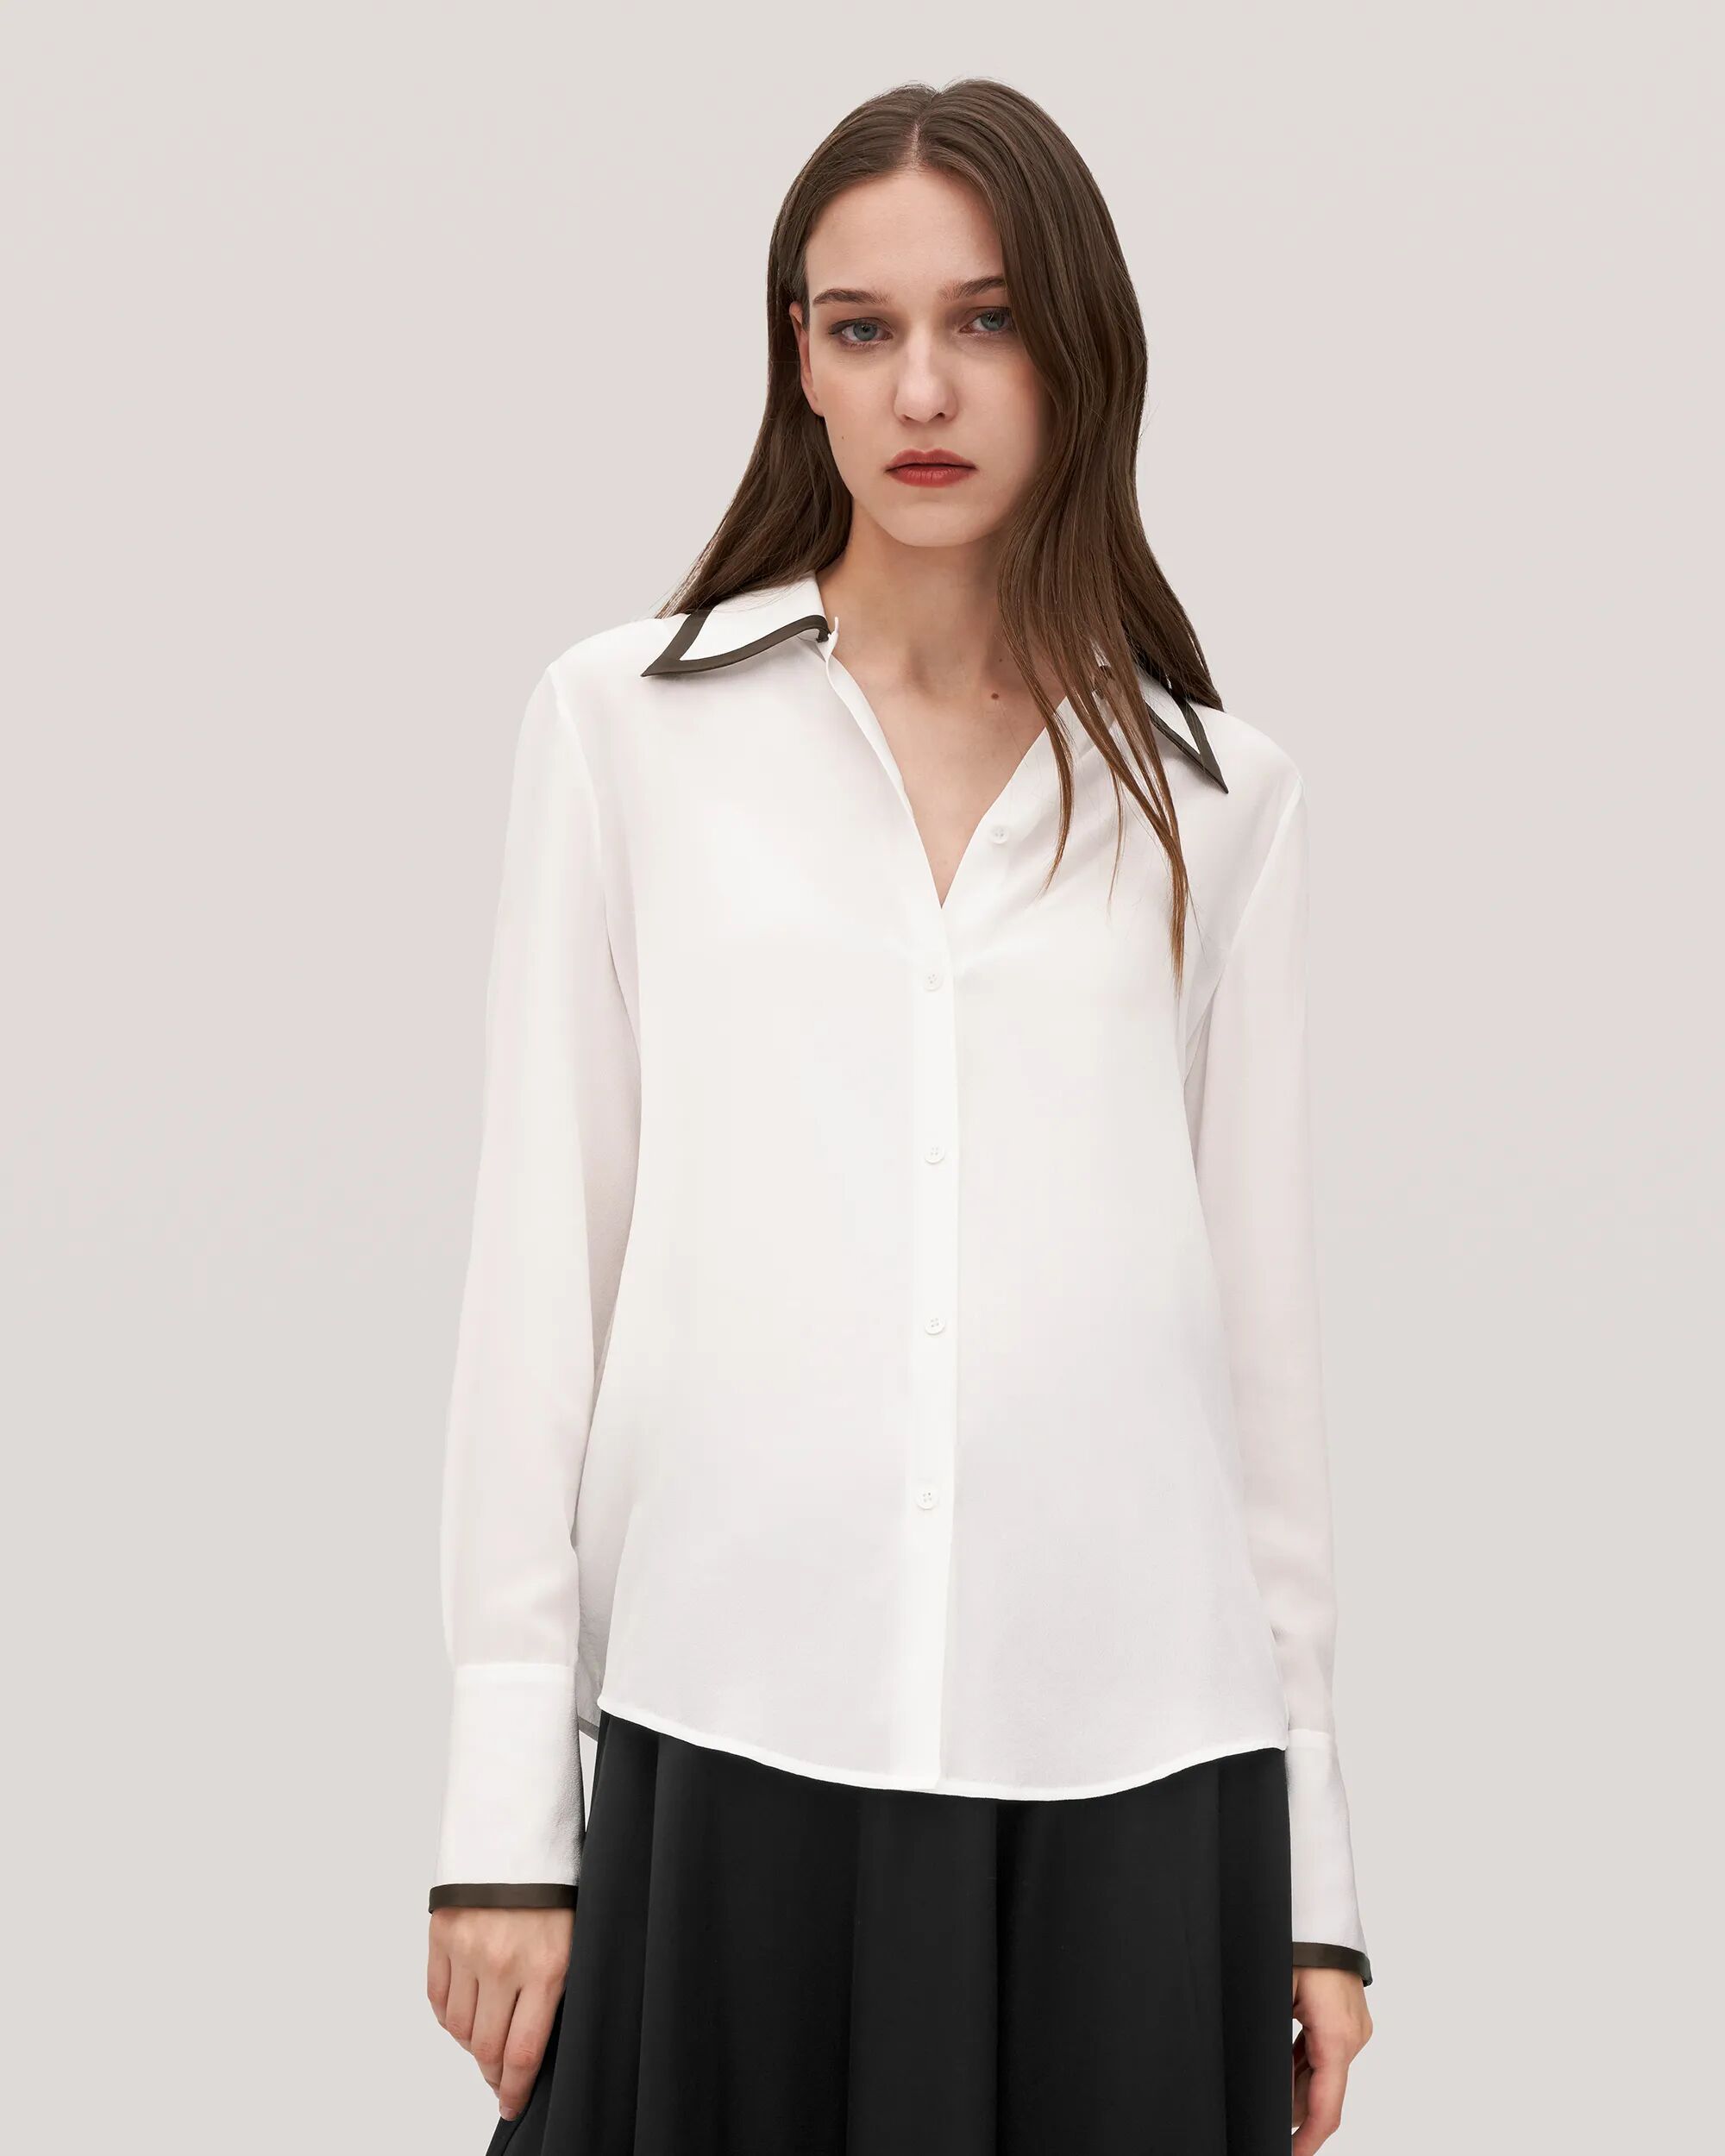 LILYSILK Business White Shirt With A Black Collar And Cuffs   Silk Striped   Women 18 Momme Crepe De Chine Long Sleeves Figure-Flattering Fit M